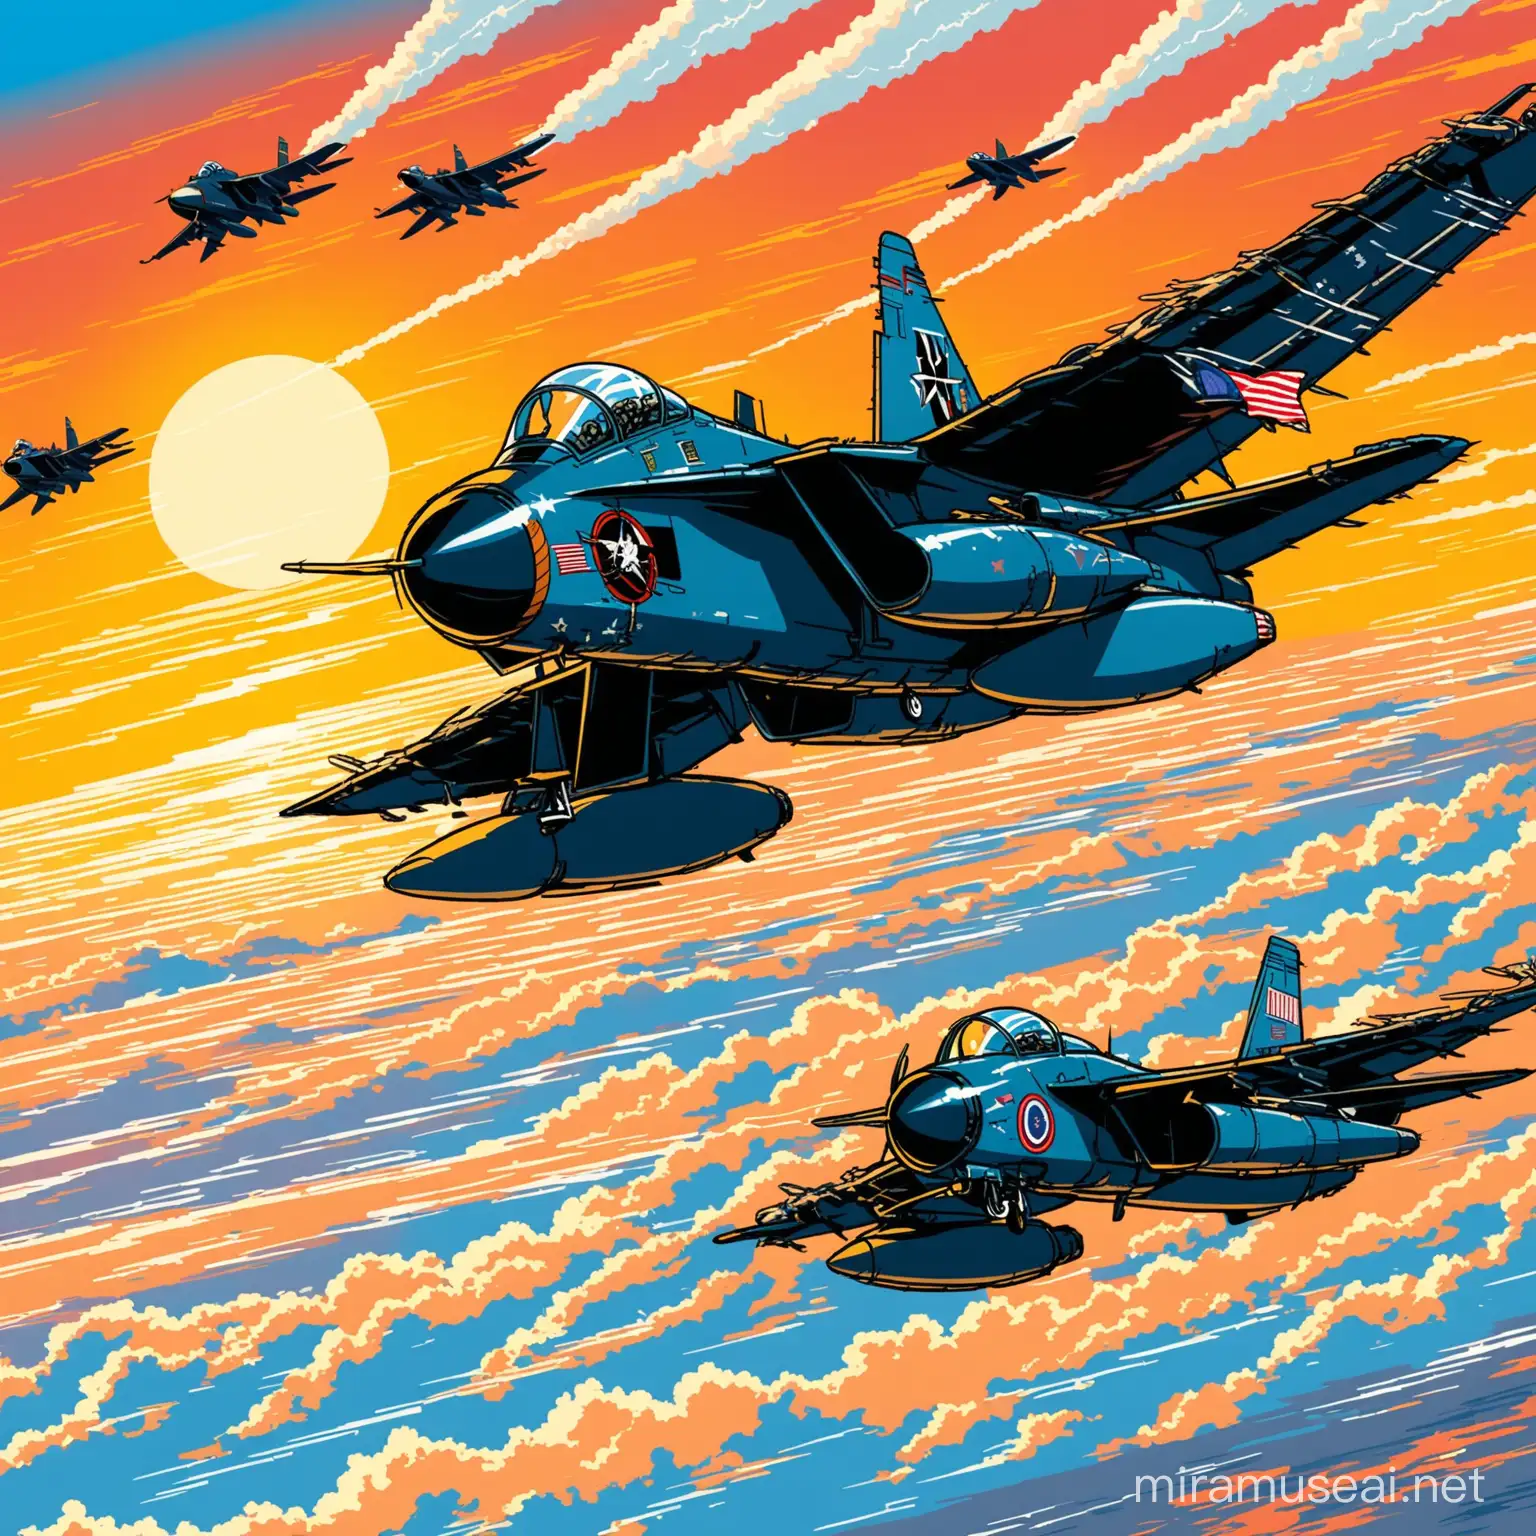 Top Gun planes, chasing the Russian planes, grindhouse art style